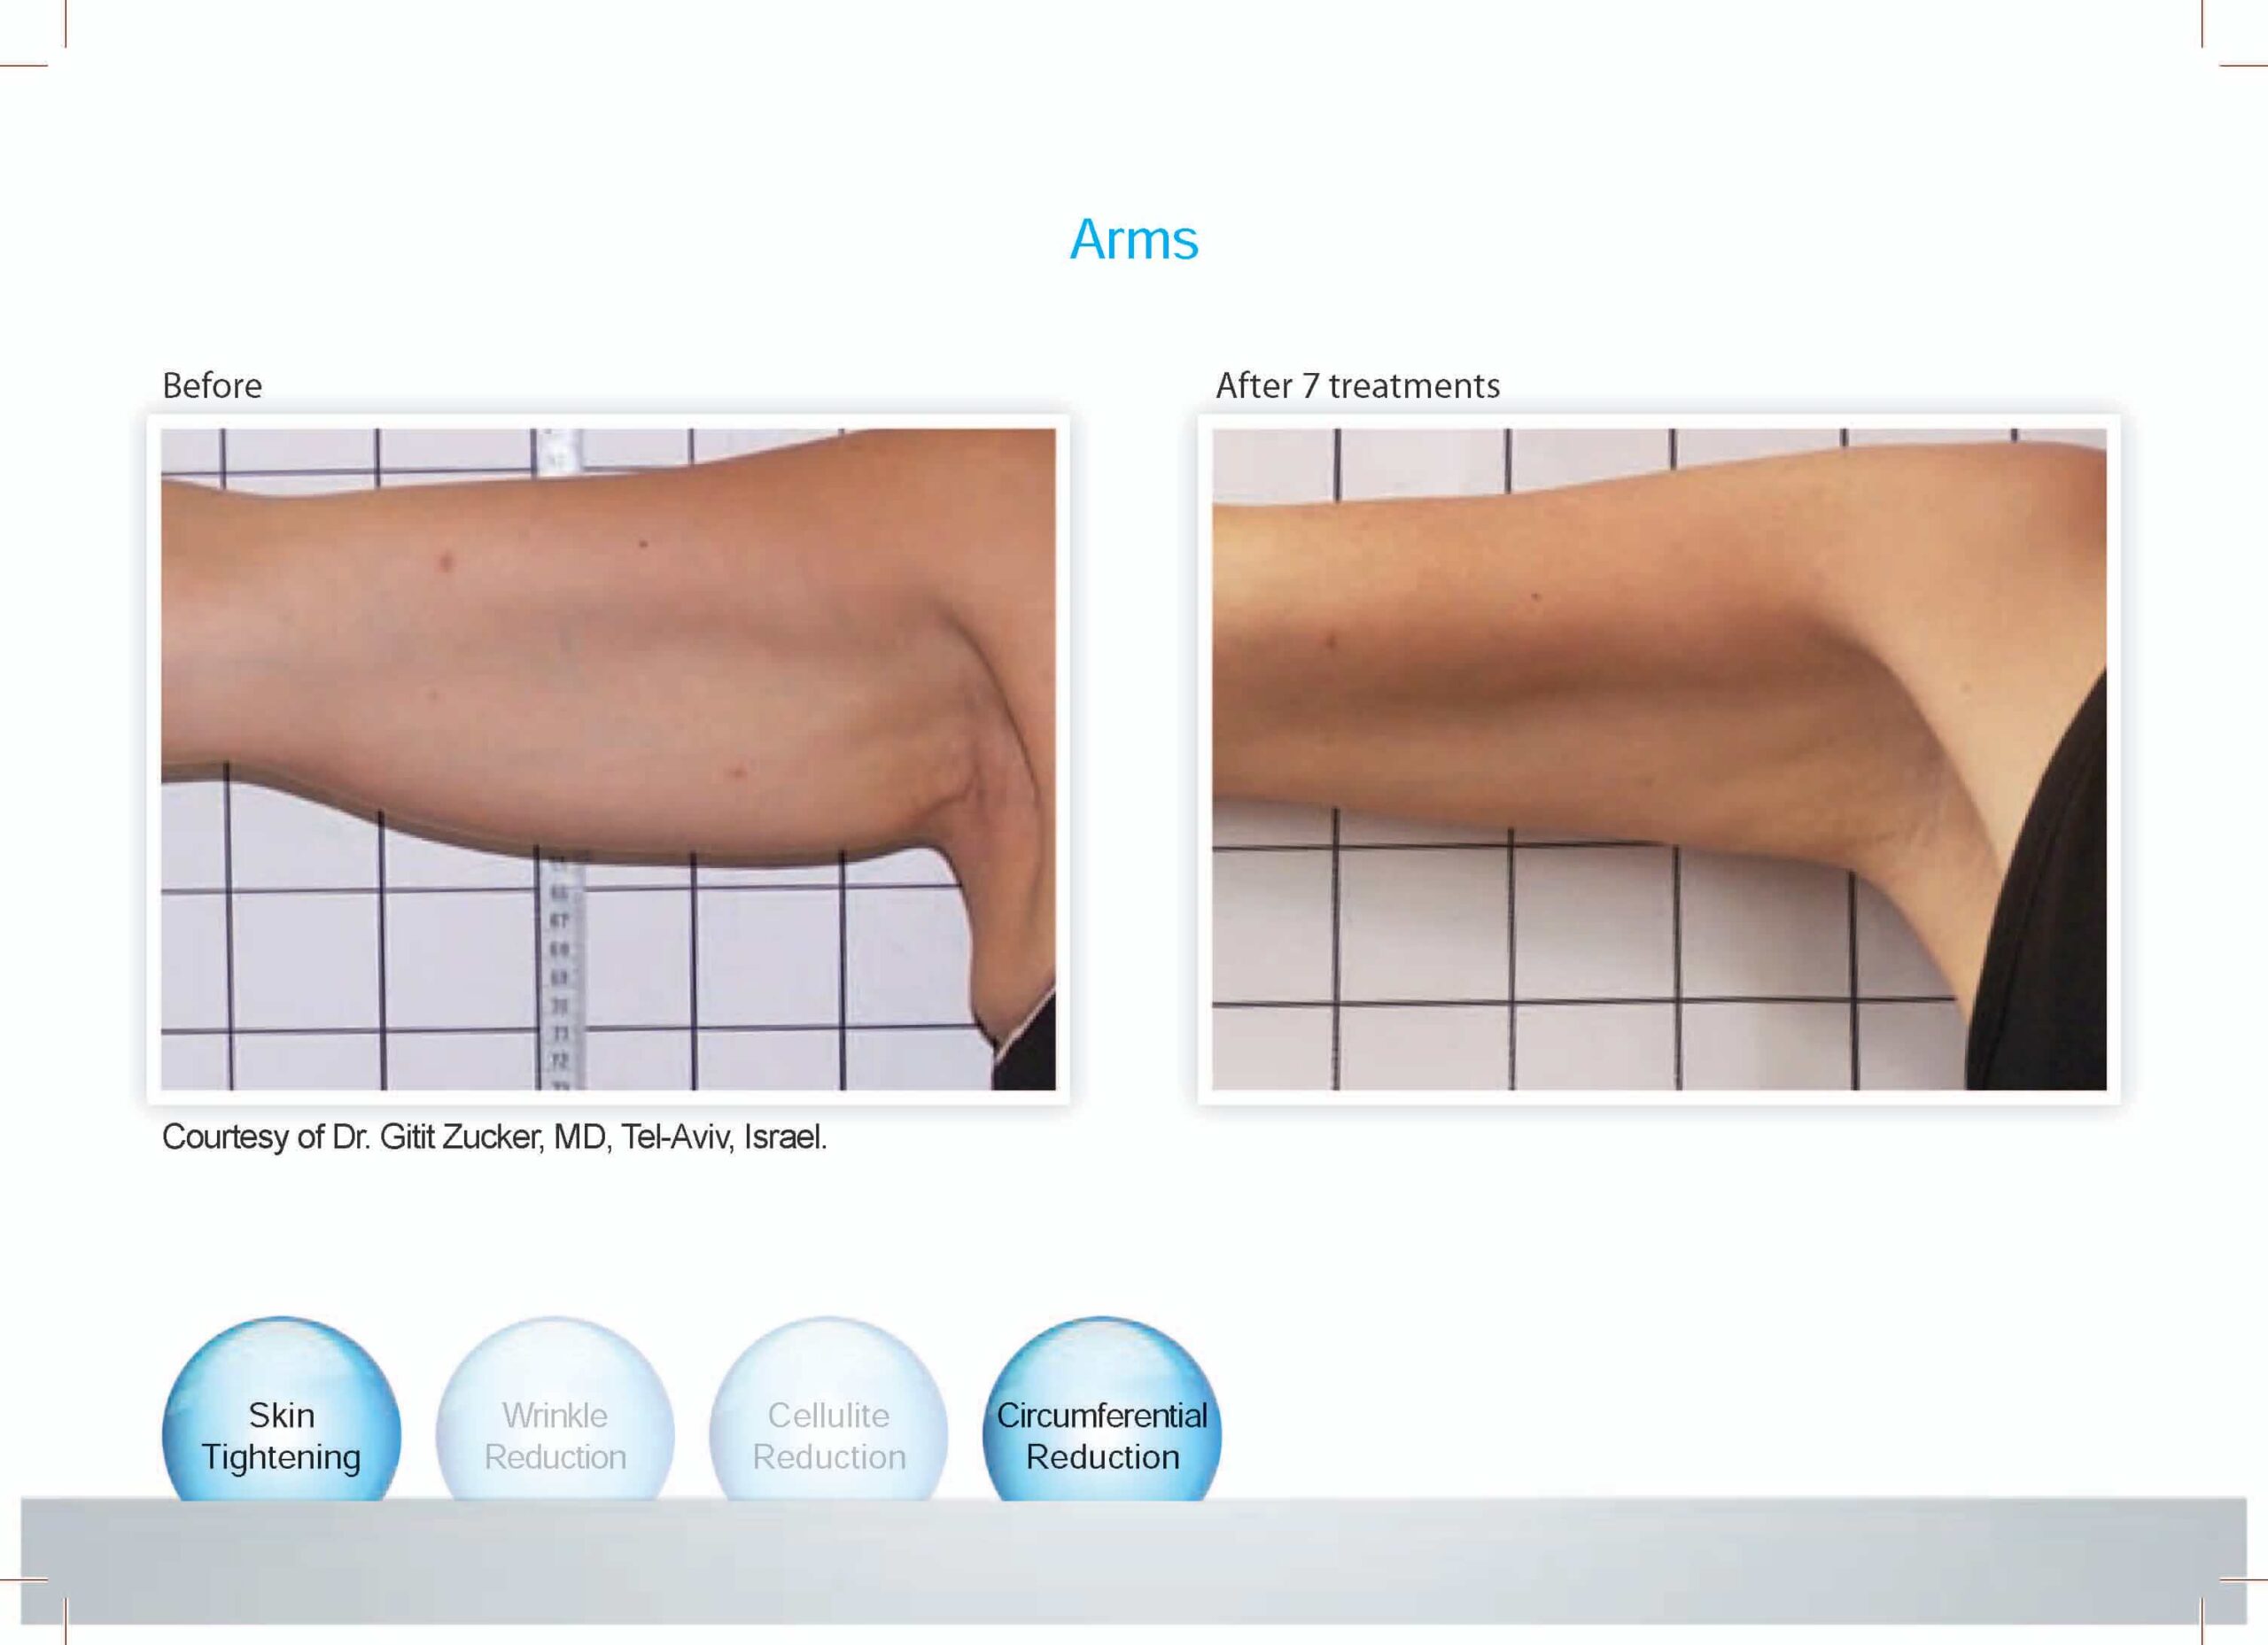 before and after arm skin tightening and circumferencial reduction